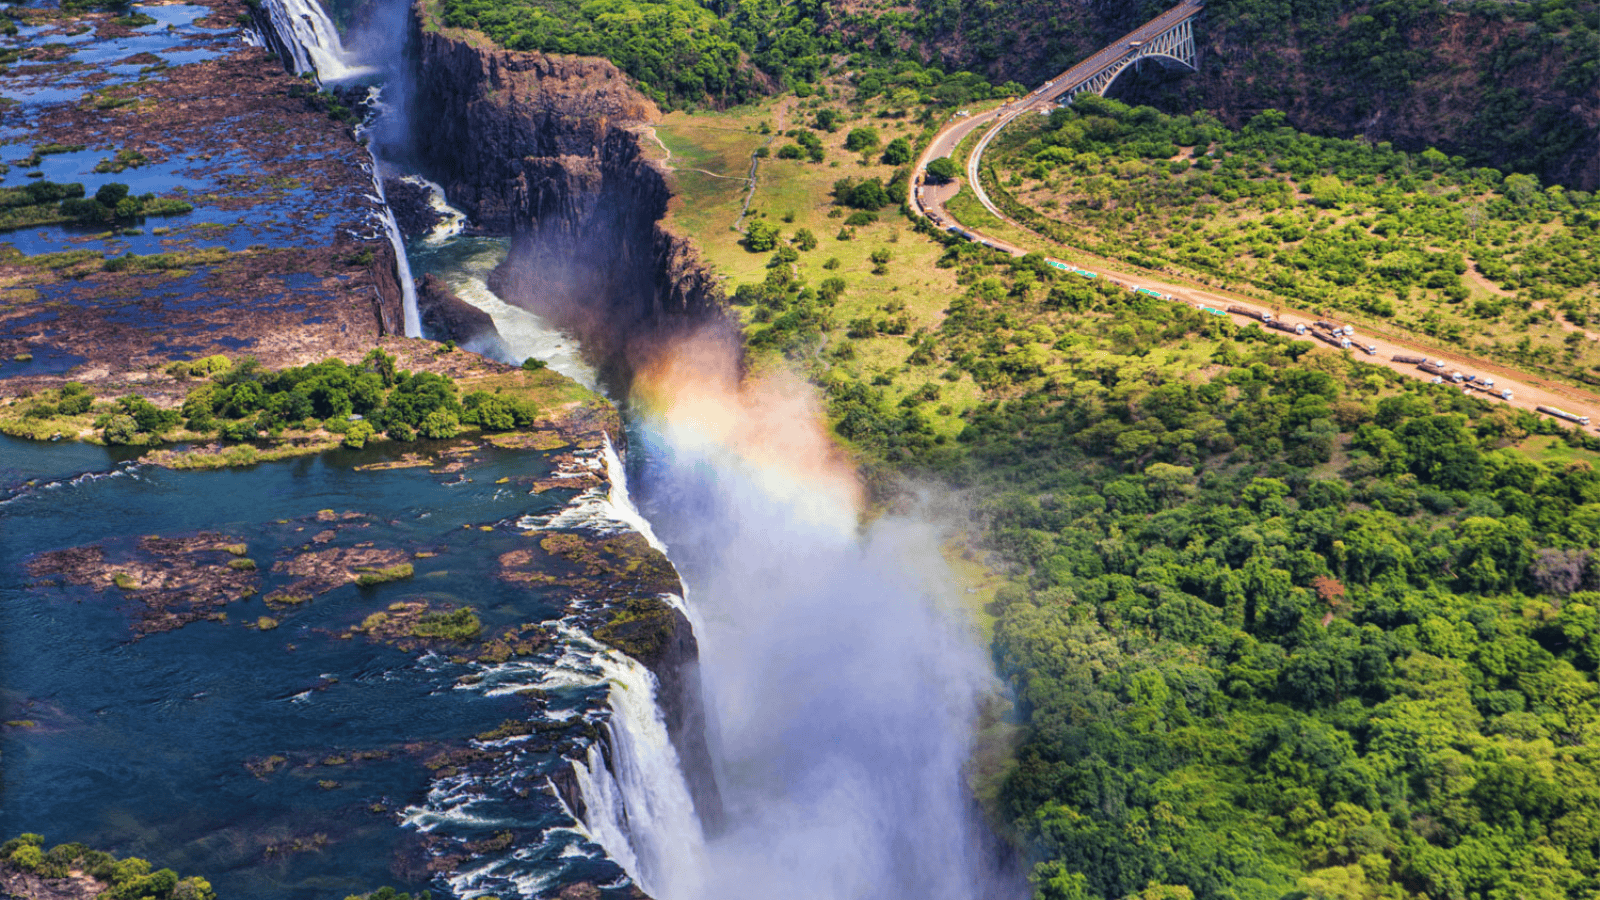 <p>If you only have several days to spare, opt for the 4-Day Discover Victoria Falls, Chobe National Park, and Hwange National Park tour. <a href="https://www.cuckoosafaris.co.zw/tour/4-day-discover-victoria-falls-chobe-national-park-and-hwange-national-park" rel="nofollow external noopener noreferrer">Cuckoo Safaris</a> packs an impressive amount of sightseeing into this short <a href="https://whatthefab.com/african-safari.html" rel="follow">African safari</a>. Admire the grandeur of Victoria Falls, look for Africa’s Big Five (lions, leopards, rhinos, elephants, and buffalos), and create lasting memories.</p>